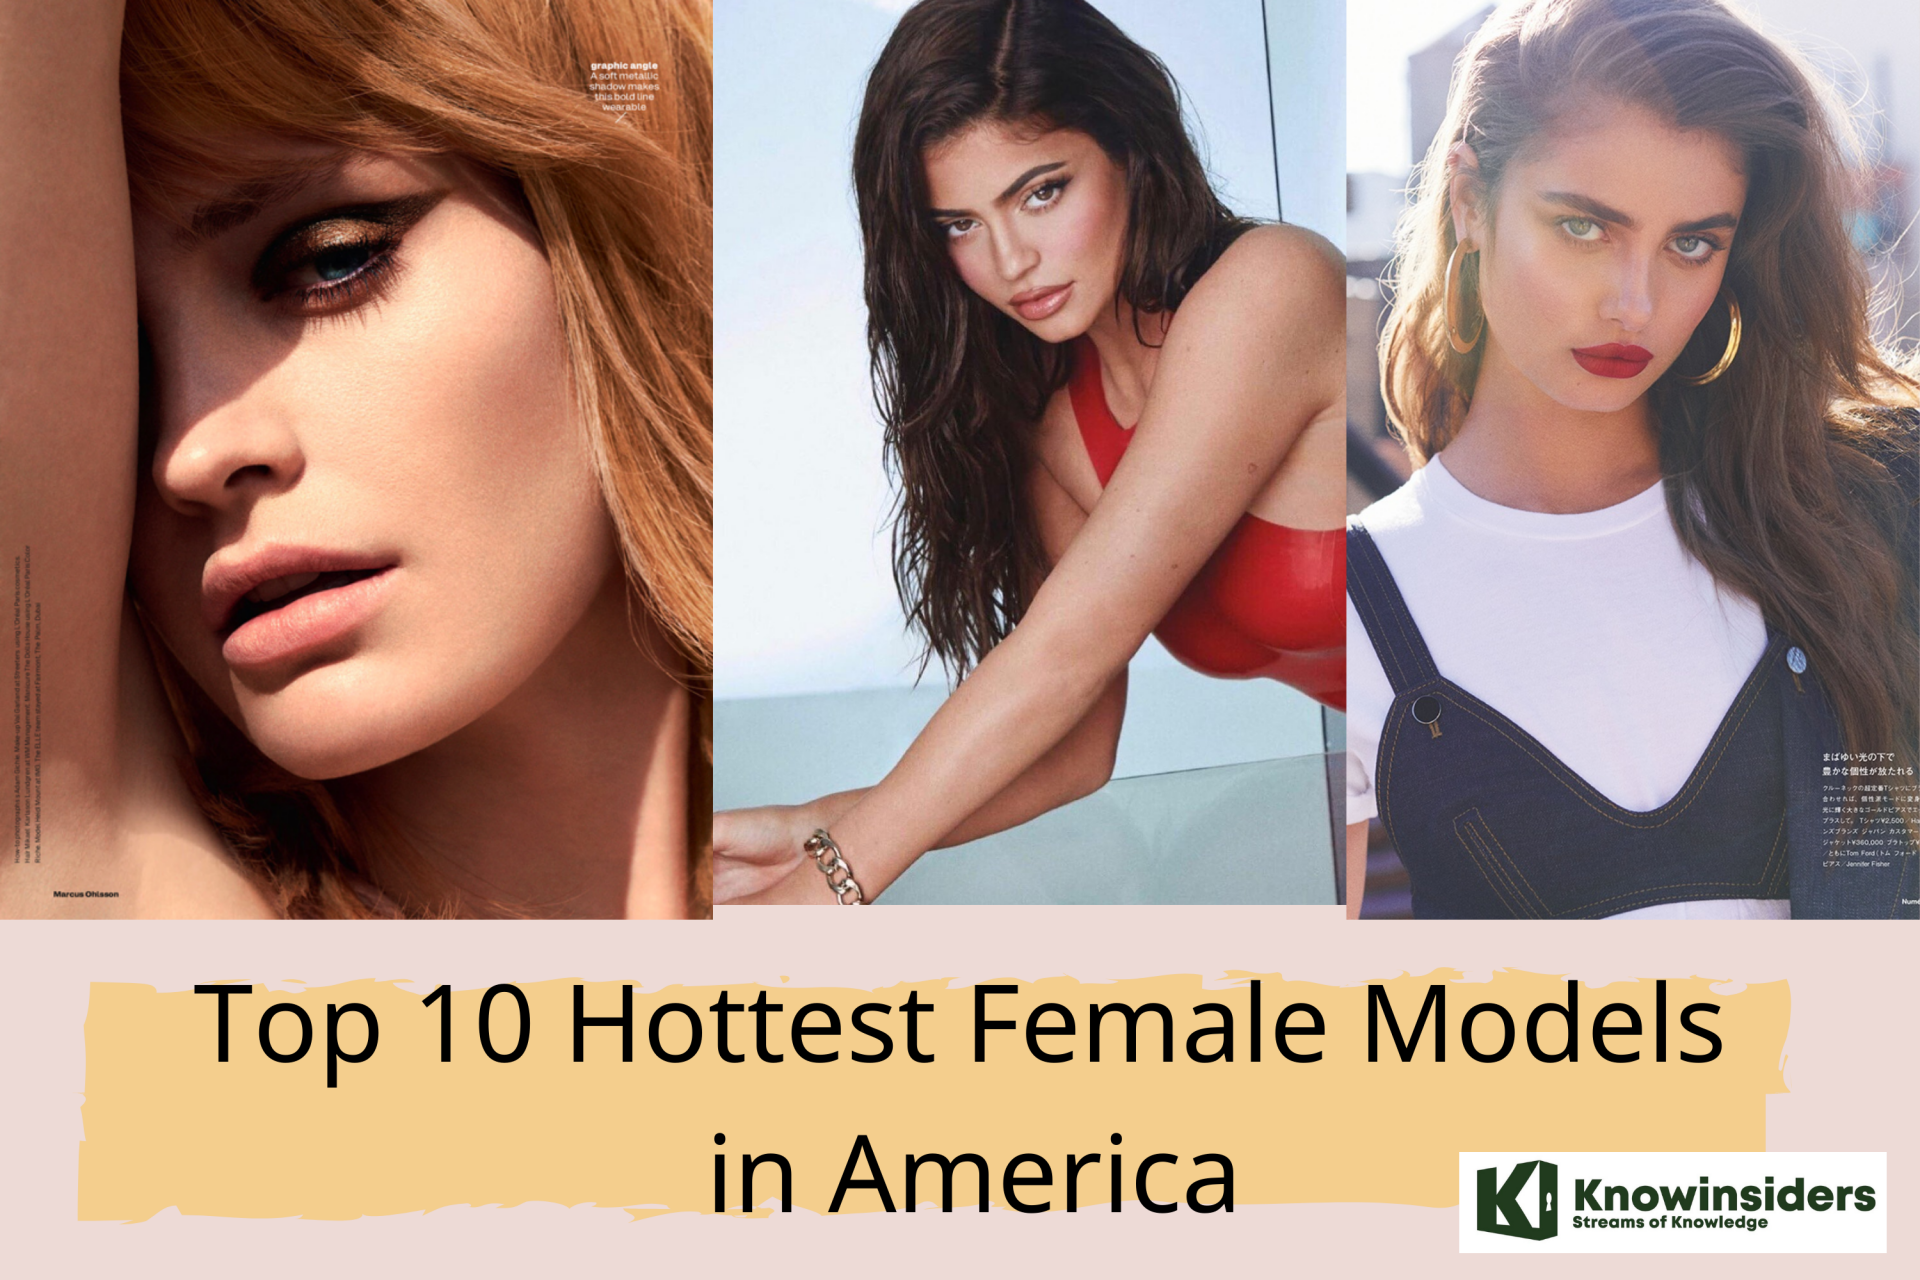 Top 10 Hottest Female Models in America for 2021/2022